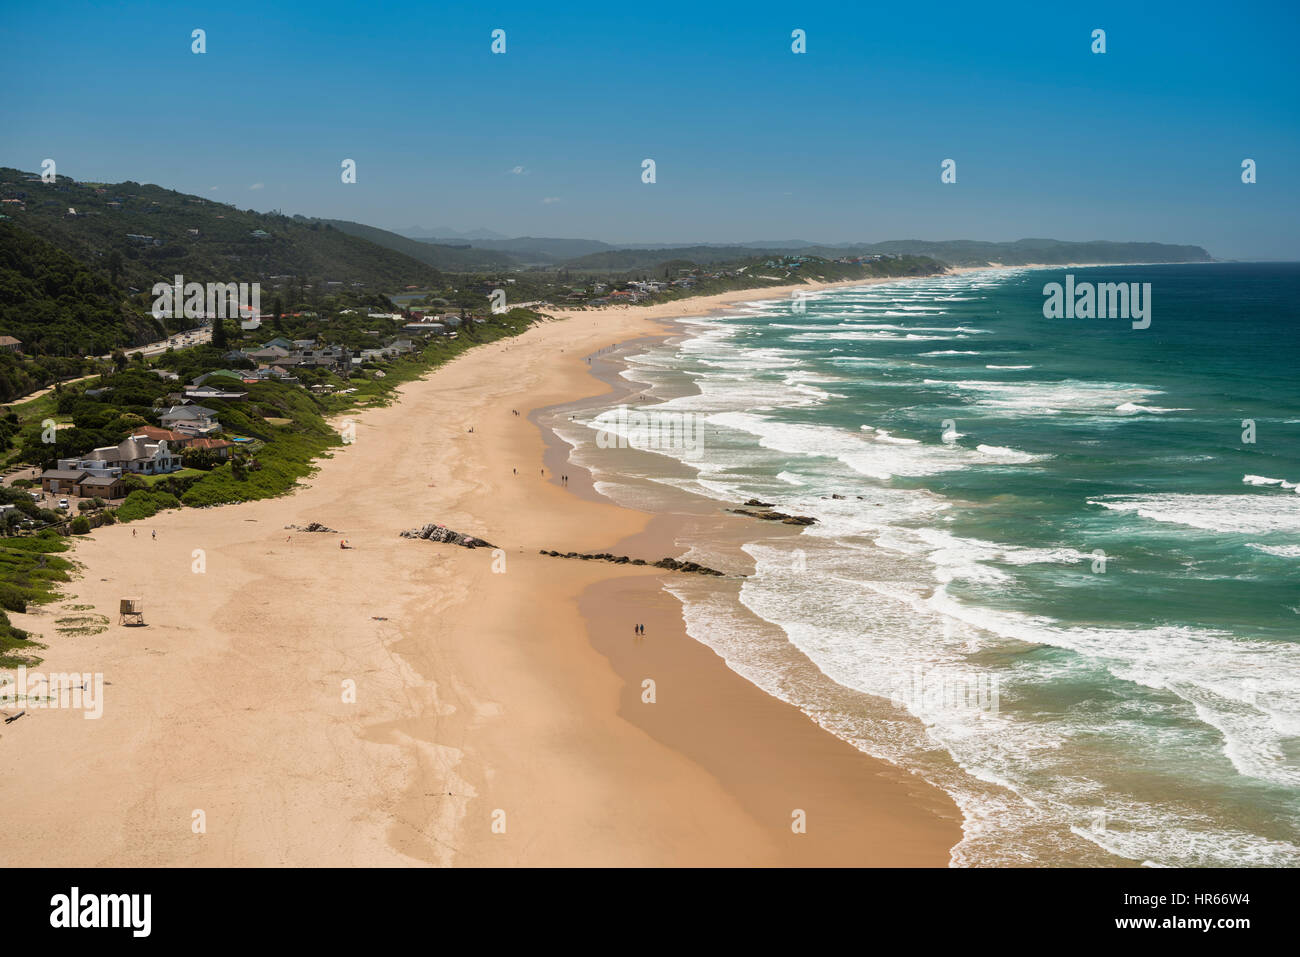 Overview of Wilderness Beach from Dolphin's point, Western Cape, South Africa Stock Photo